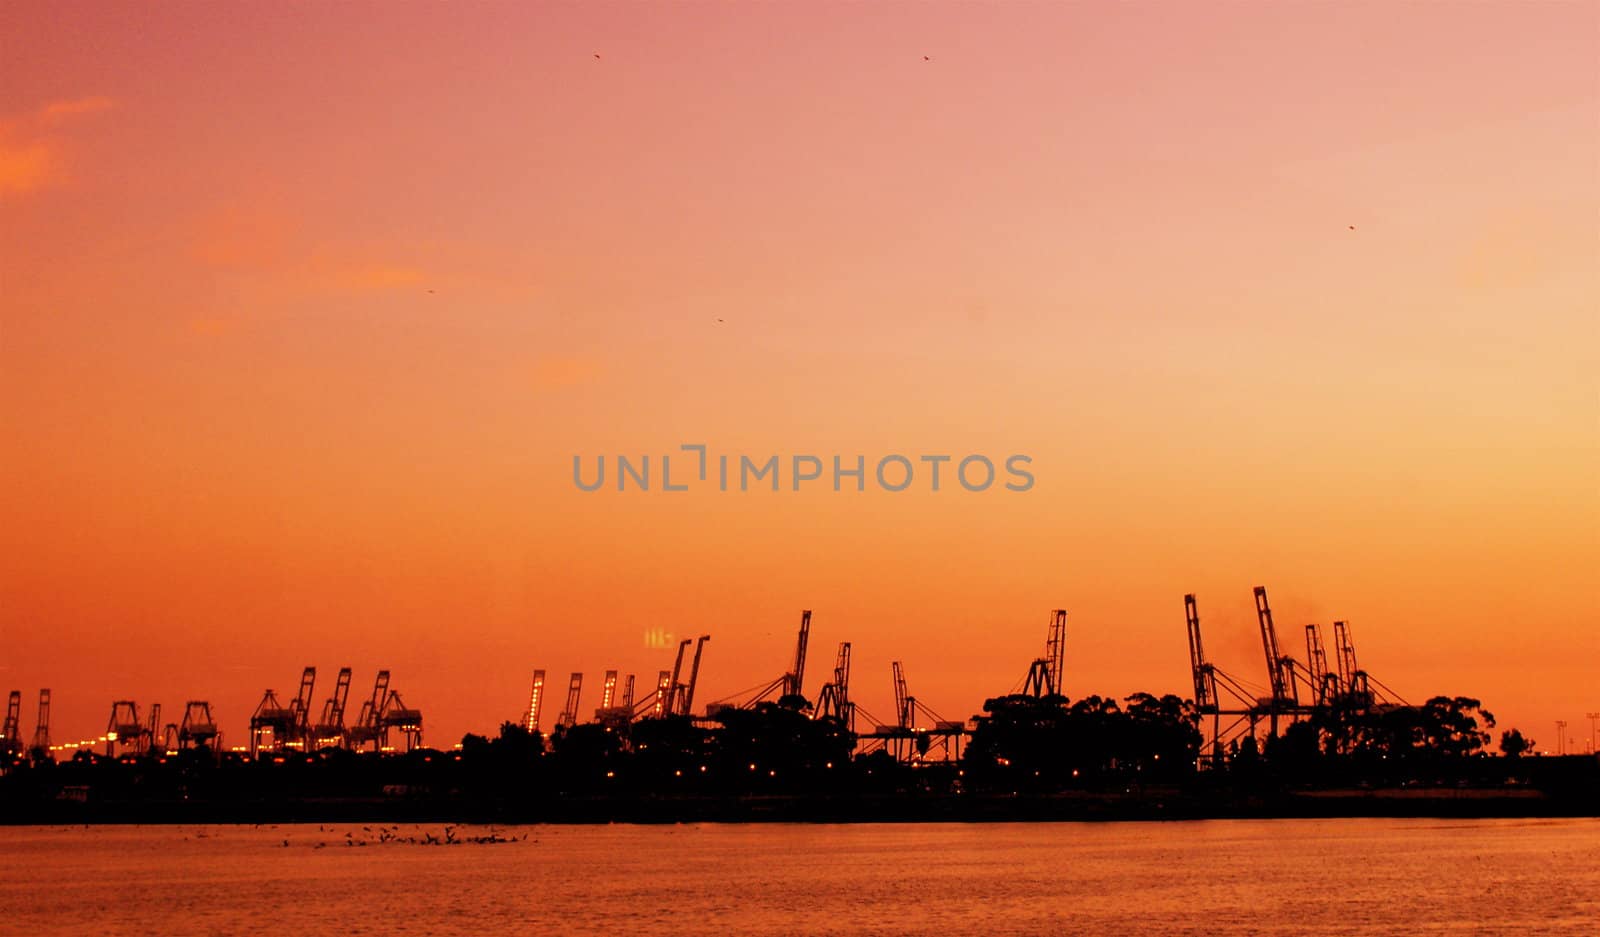 Long Beach Harbour Skyline at sunset with cranes and ships in silhouette